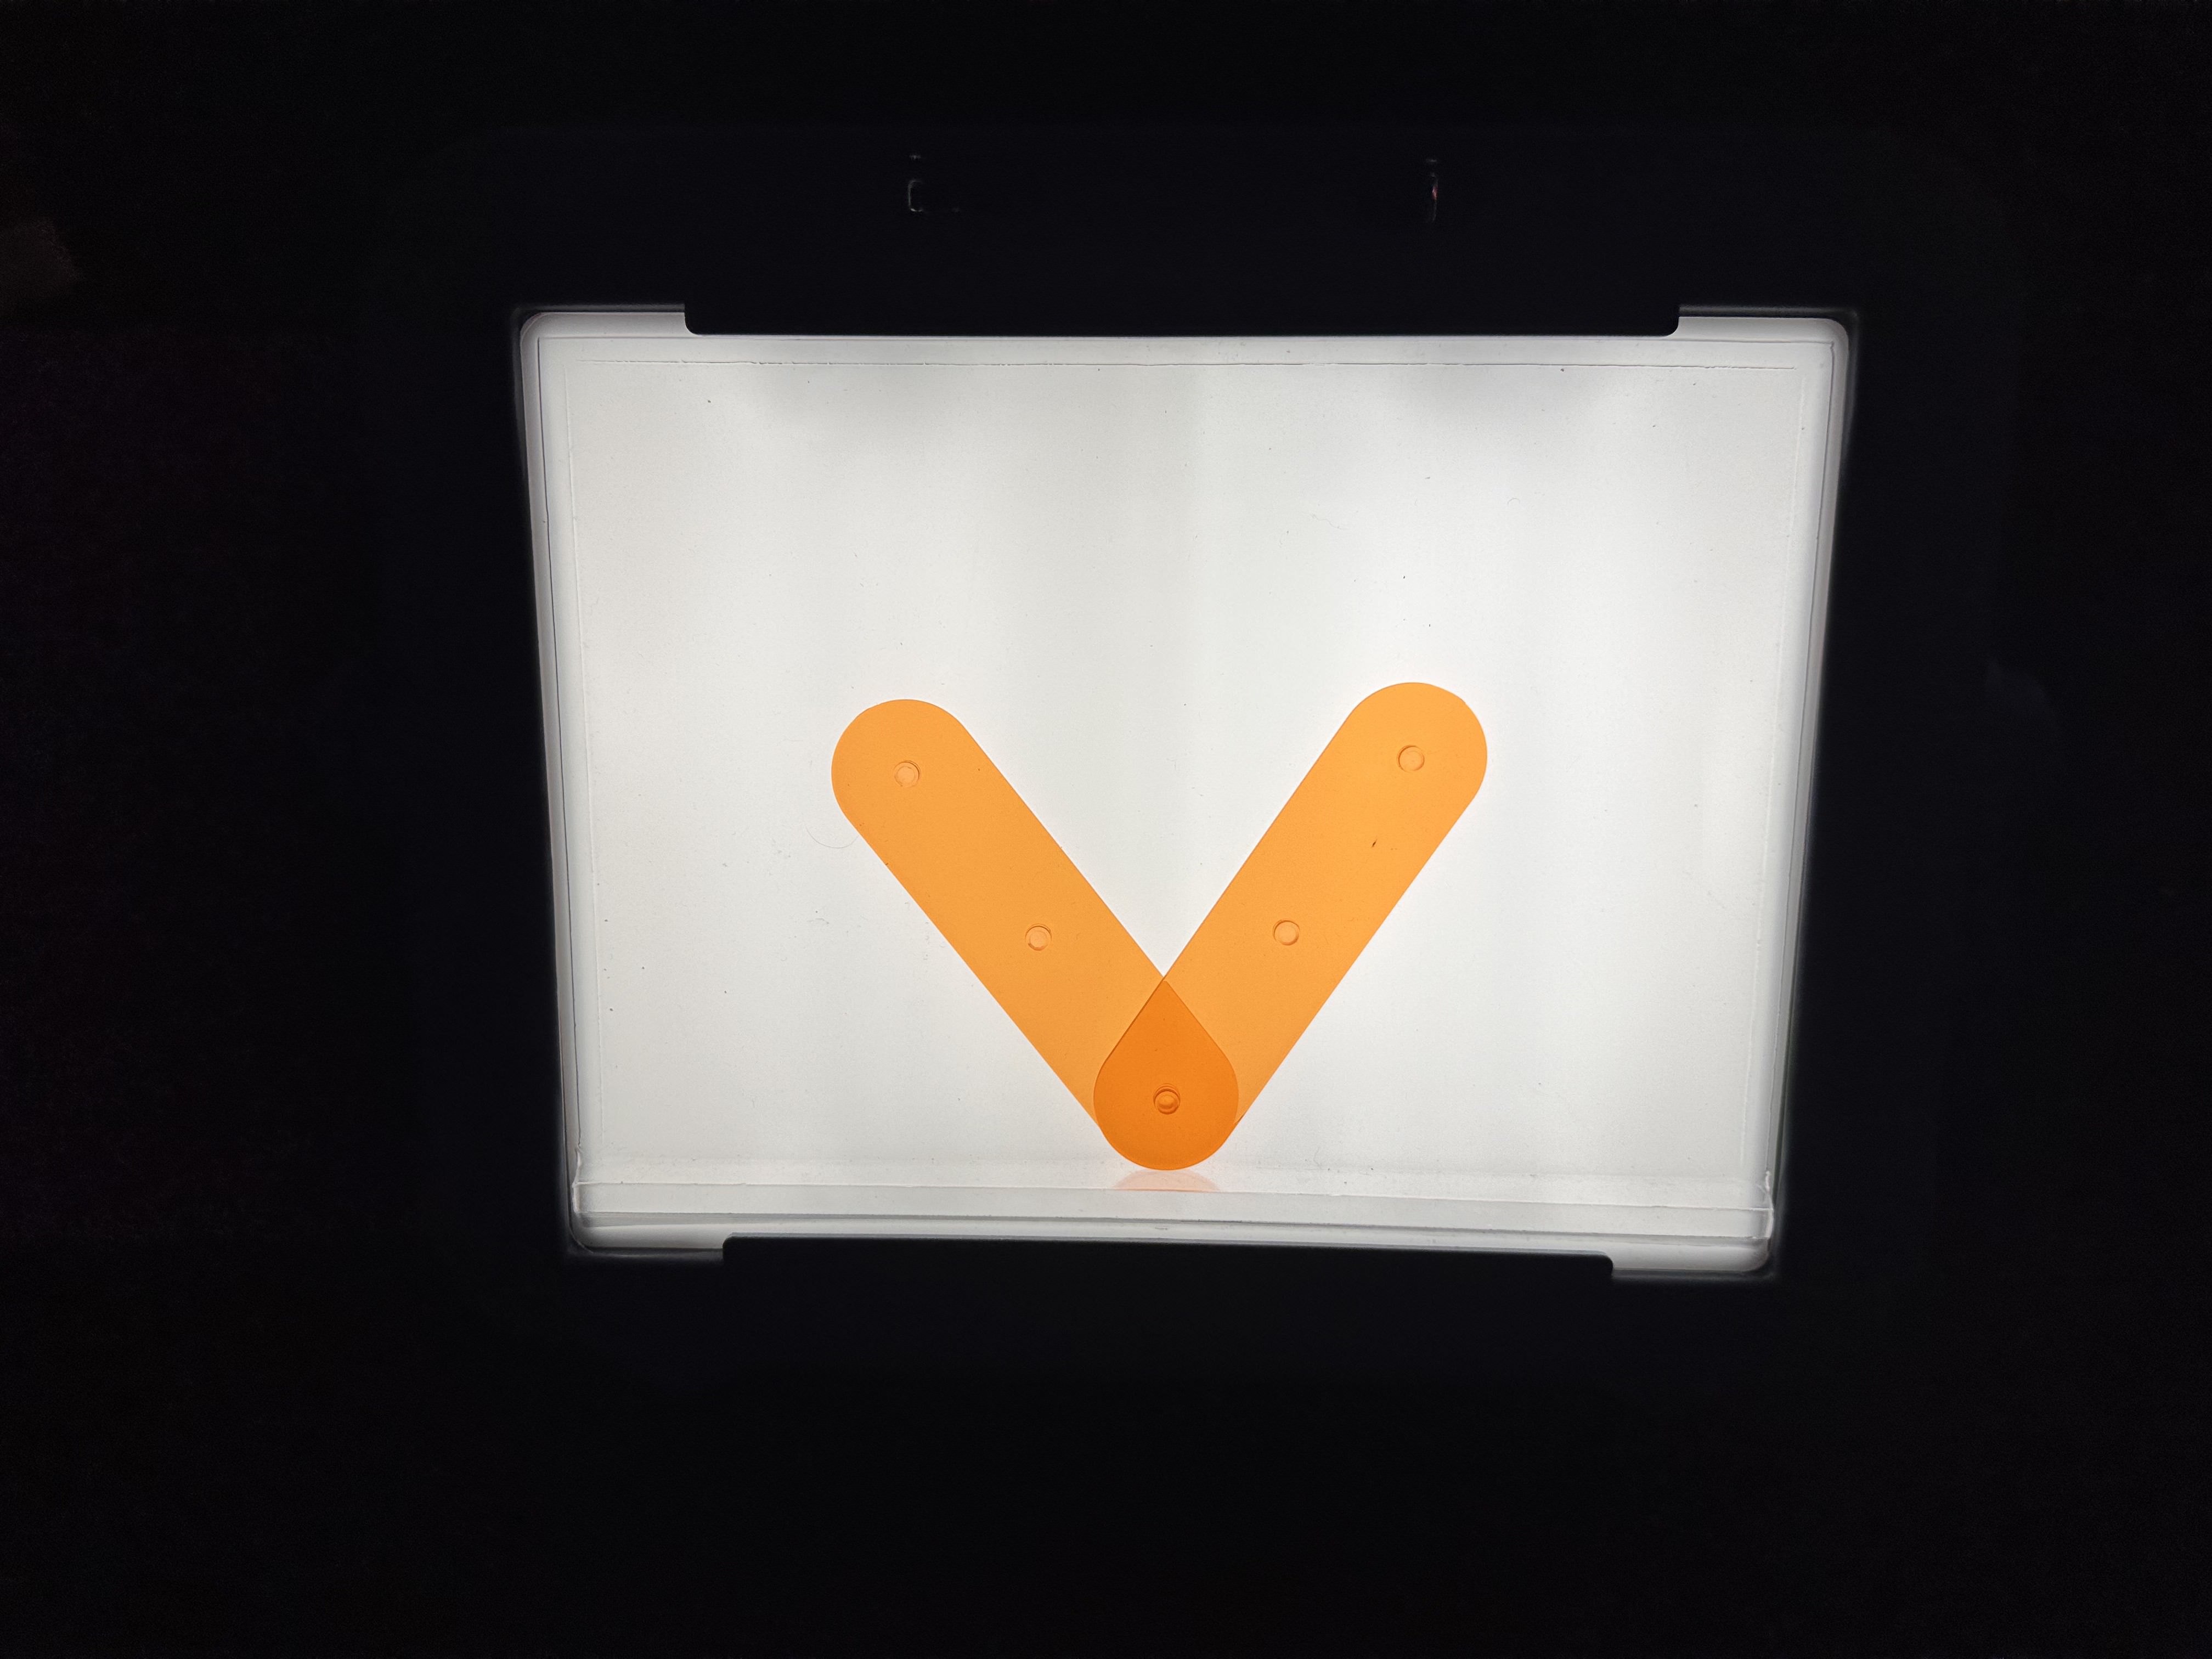 Two transparent, orange lines interlocking to create a lowercase letter “v” on a lightbox in a dark room. 